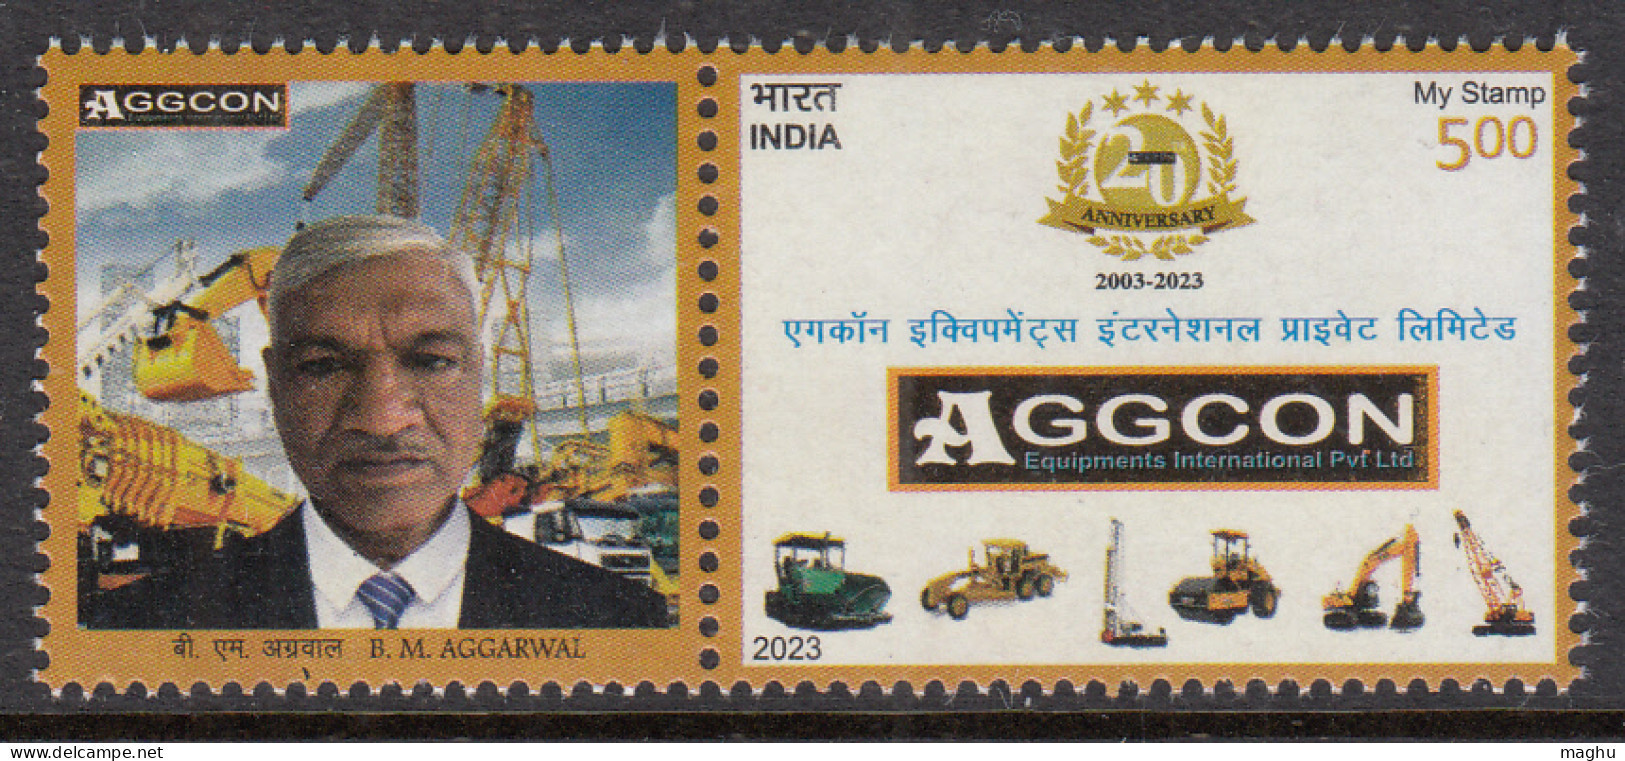 My Stamp 2023, AGGCON Mr Agarwal, 'Rental' Equipment  Man, For Mining Mineral Truck Transport Energy Railway, Telecom - Minerals